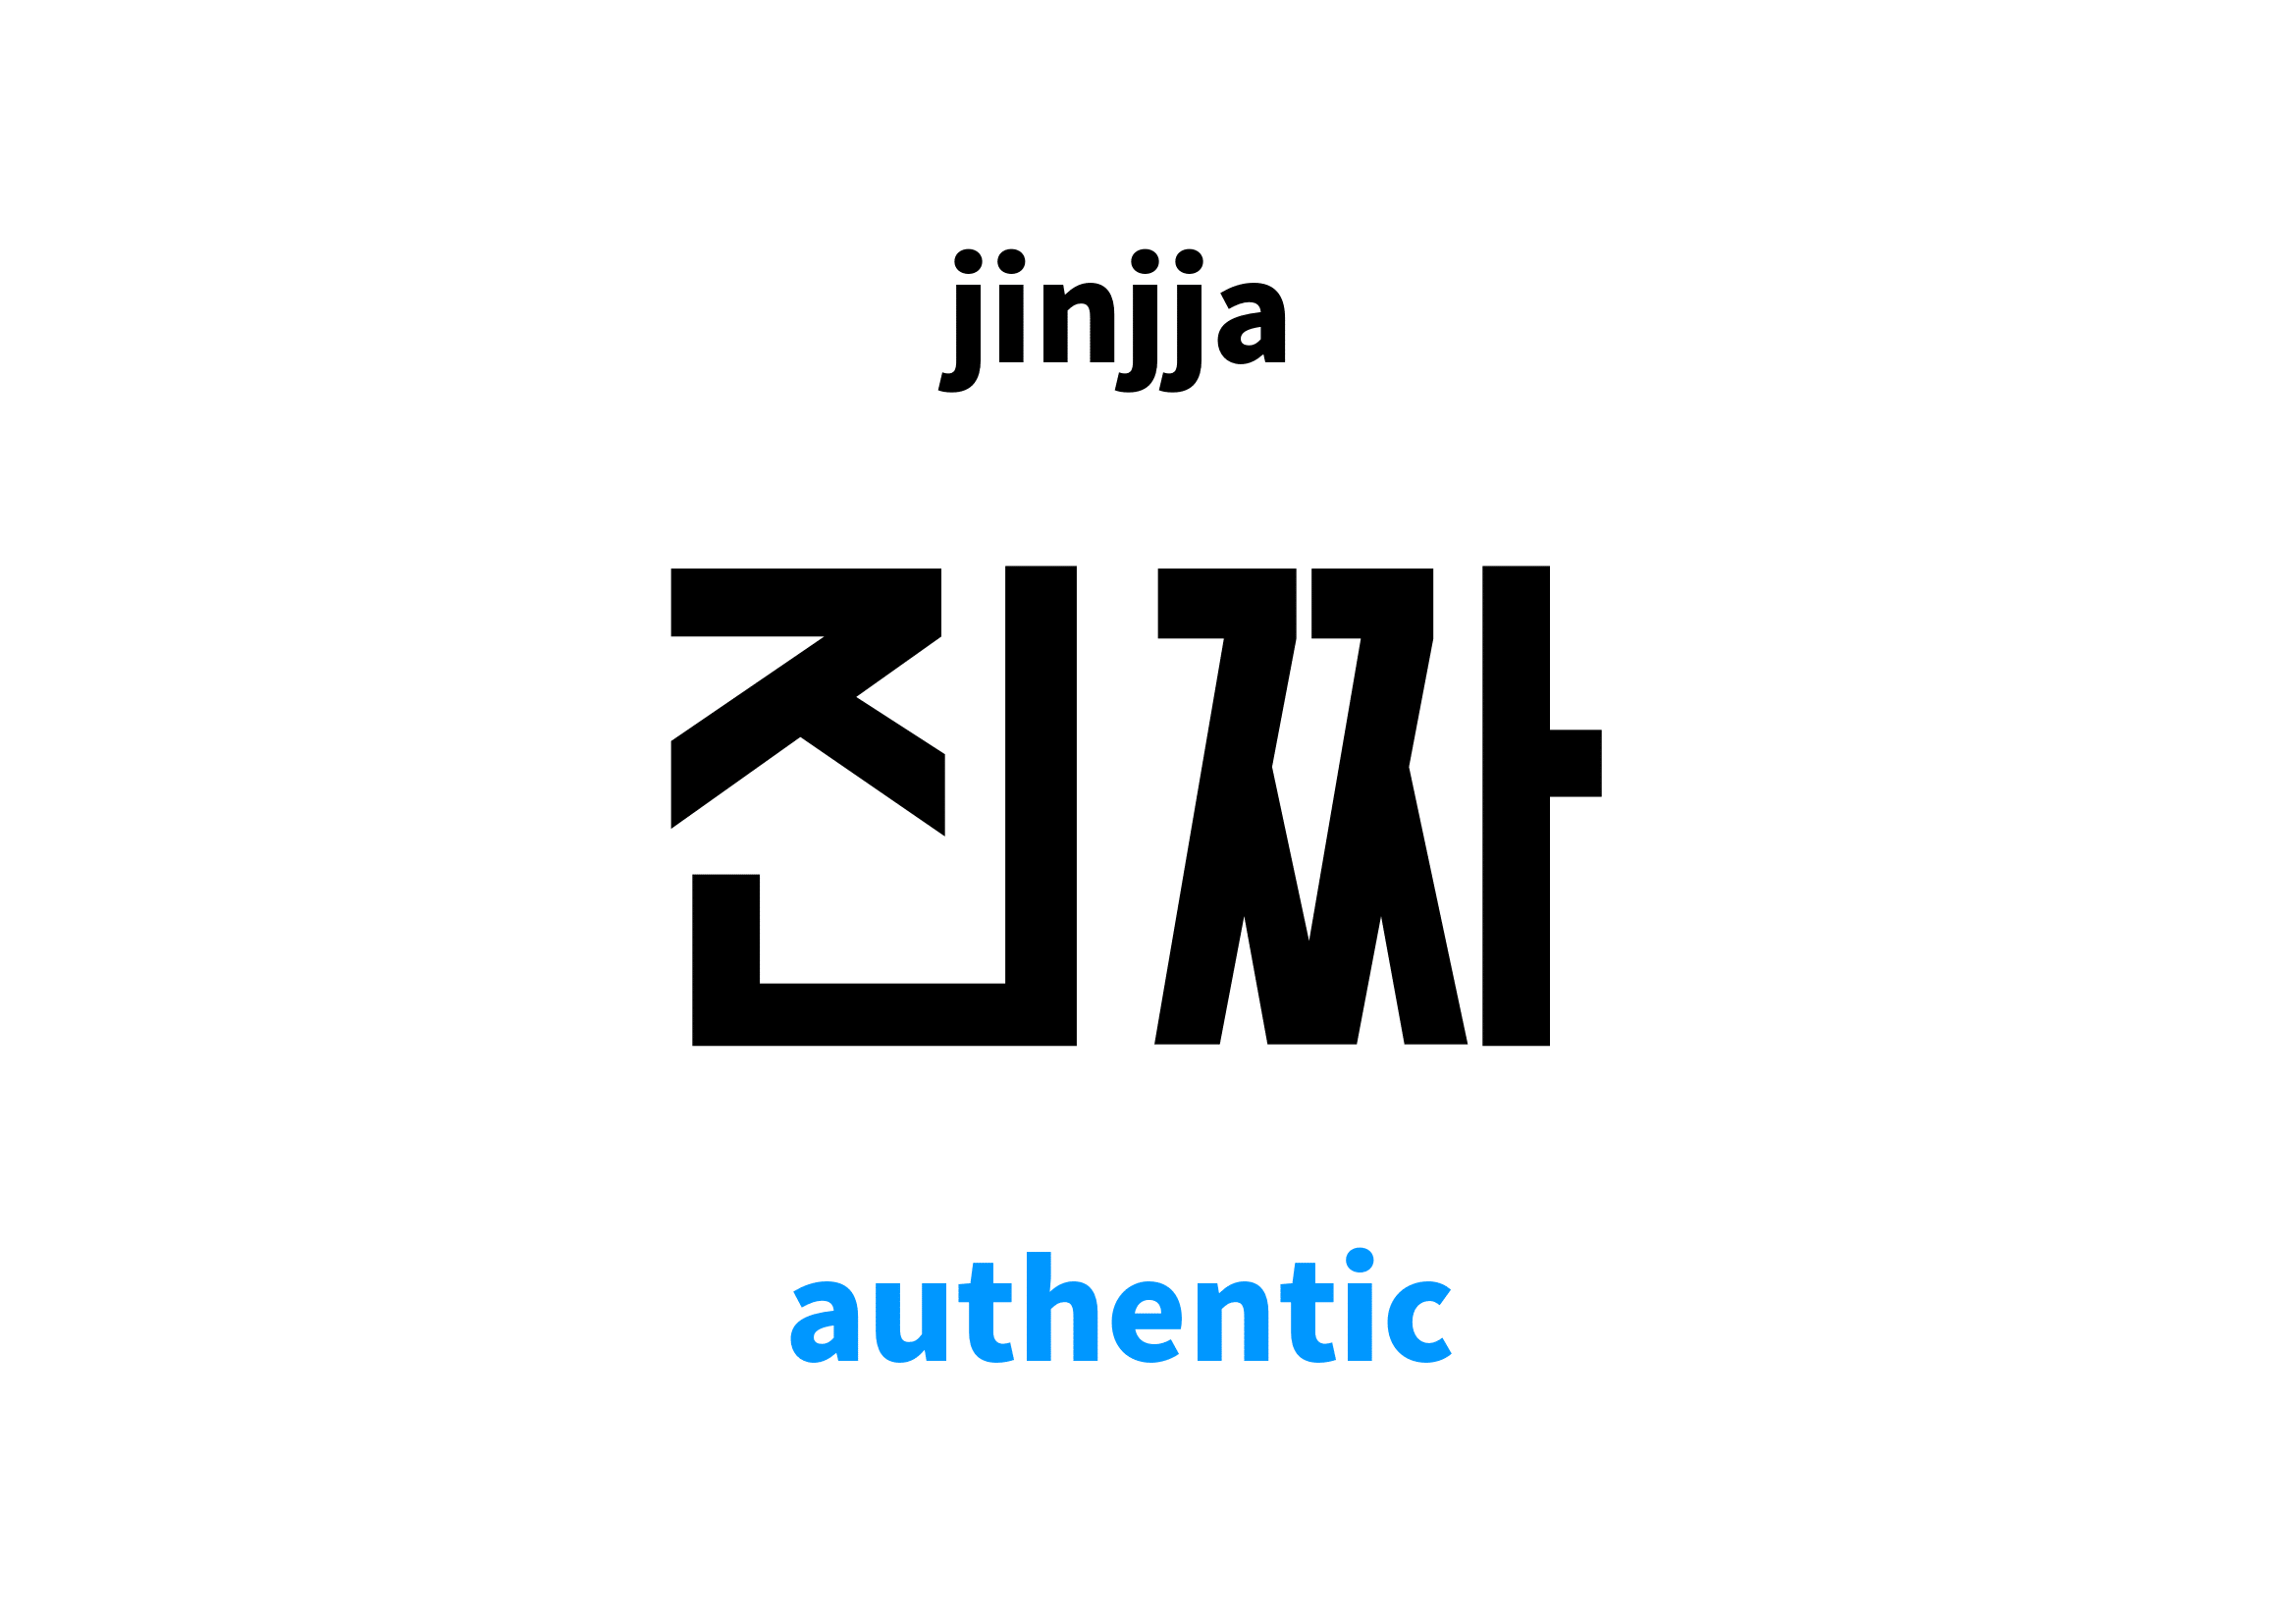 Authentic in Korean, 진짜 meaning